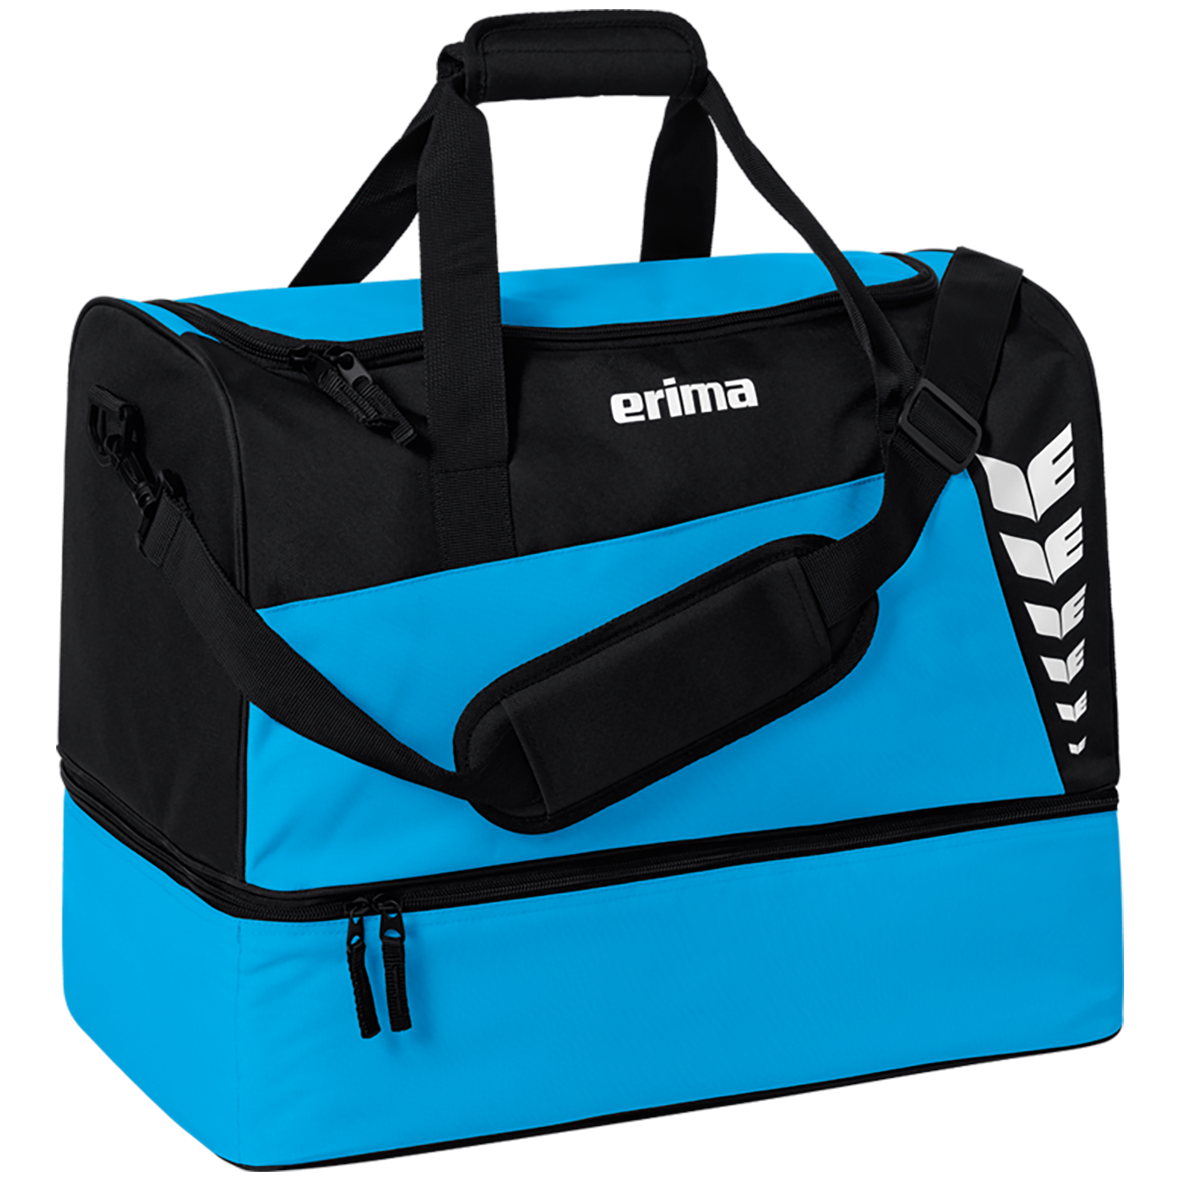 ERIMA SIX WINGS SPORTS BAG WITH BOTTOM COMPARTMENT, CURACAO-BLACK.